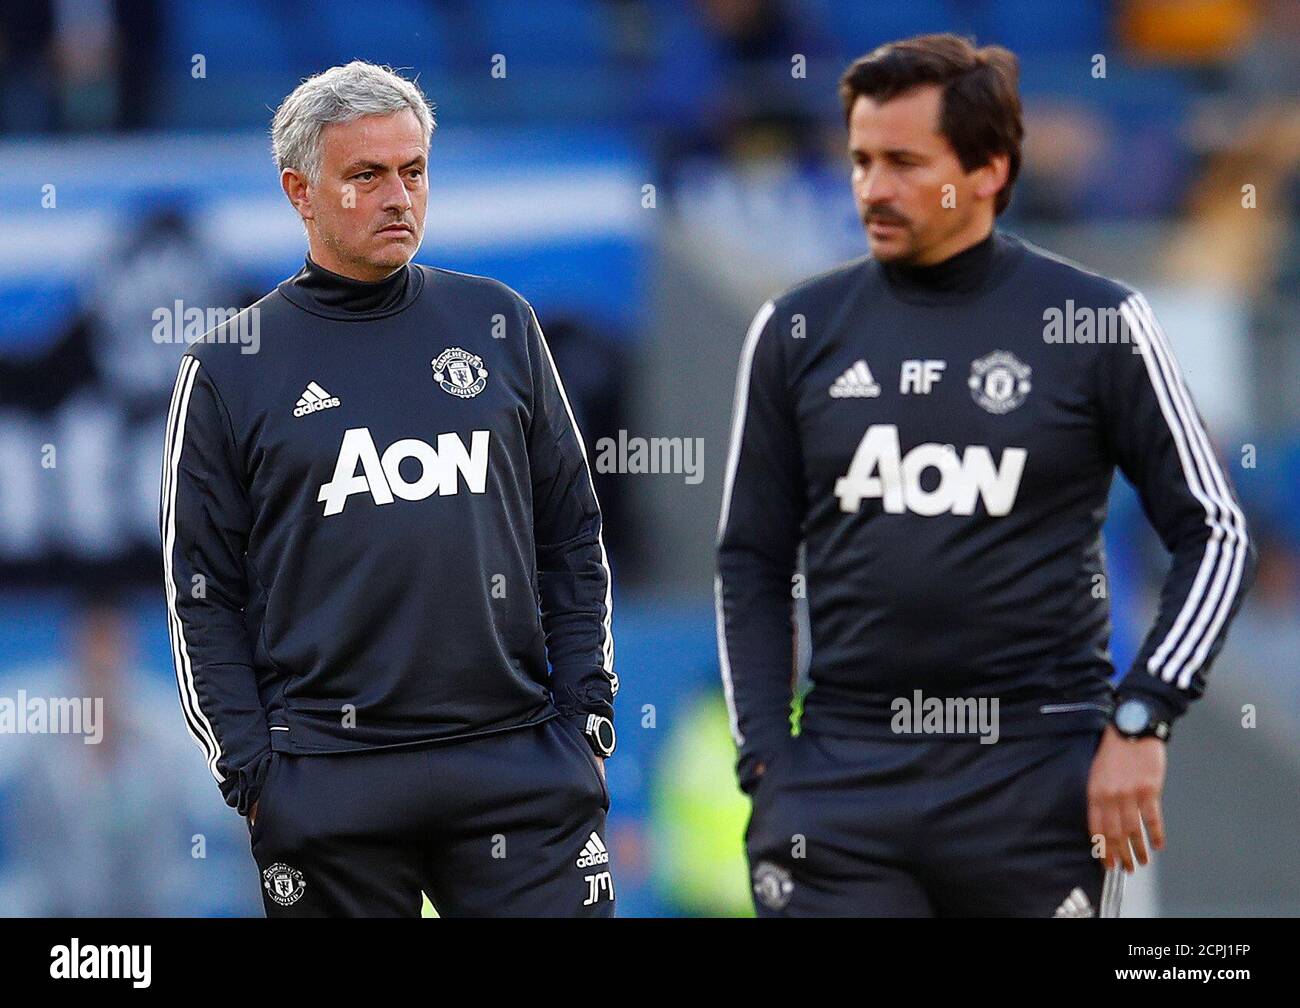 Soccer Football - Premier League - Brighton & Hove Albion v Manchester United - The American Express Community Stadium, Brighton, Britain - May 4, 2018   Manchester United manager Jose Mourinho and assistant manager Rui Faria during the warm up before the match    REUTERS/Eddie Keogh    EDITORIAL USE ONLY. No use with unauthorized audio, video, data, fixture lists, club/league logos or 'live' services. Online in-match use limited to 75 images, no video emulation. No use in betting, games or single club/league/player publications.  Please contact your account representative for further details. Stock Photo